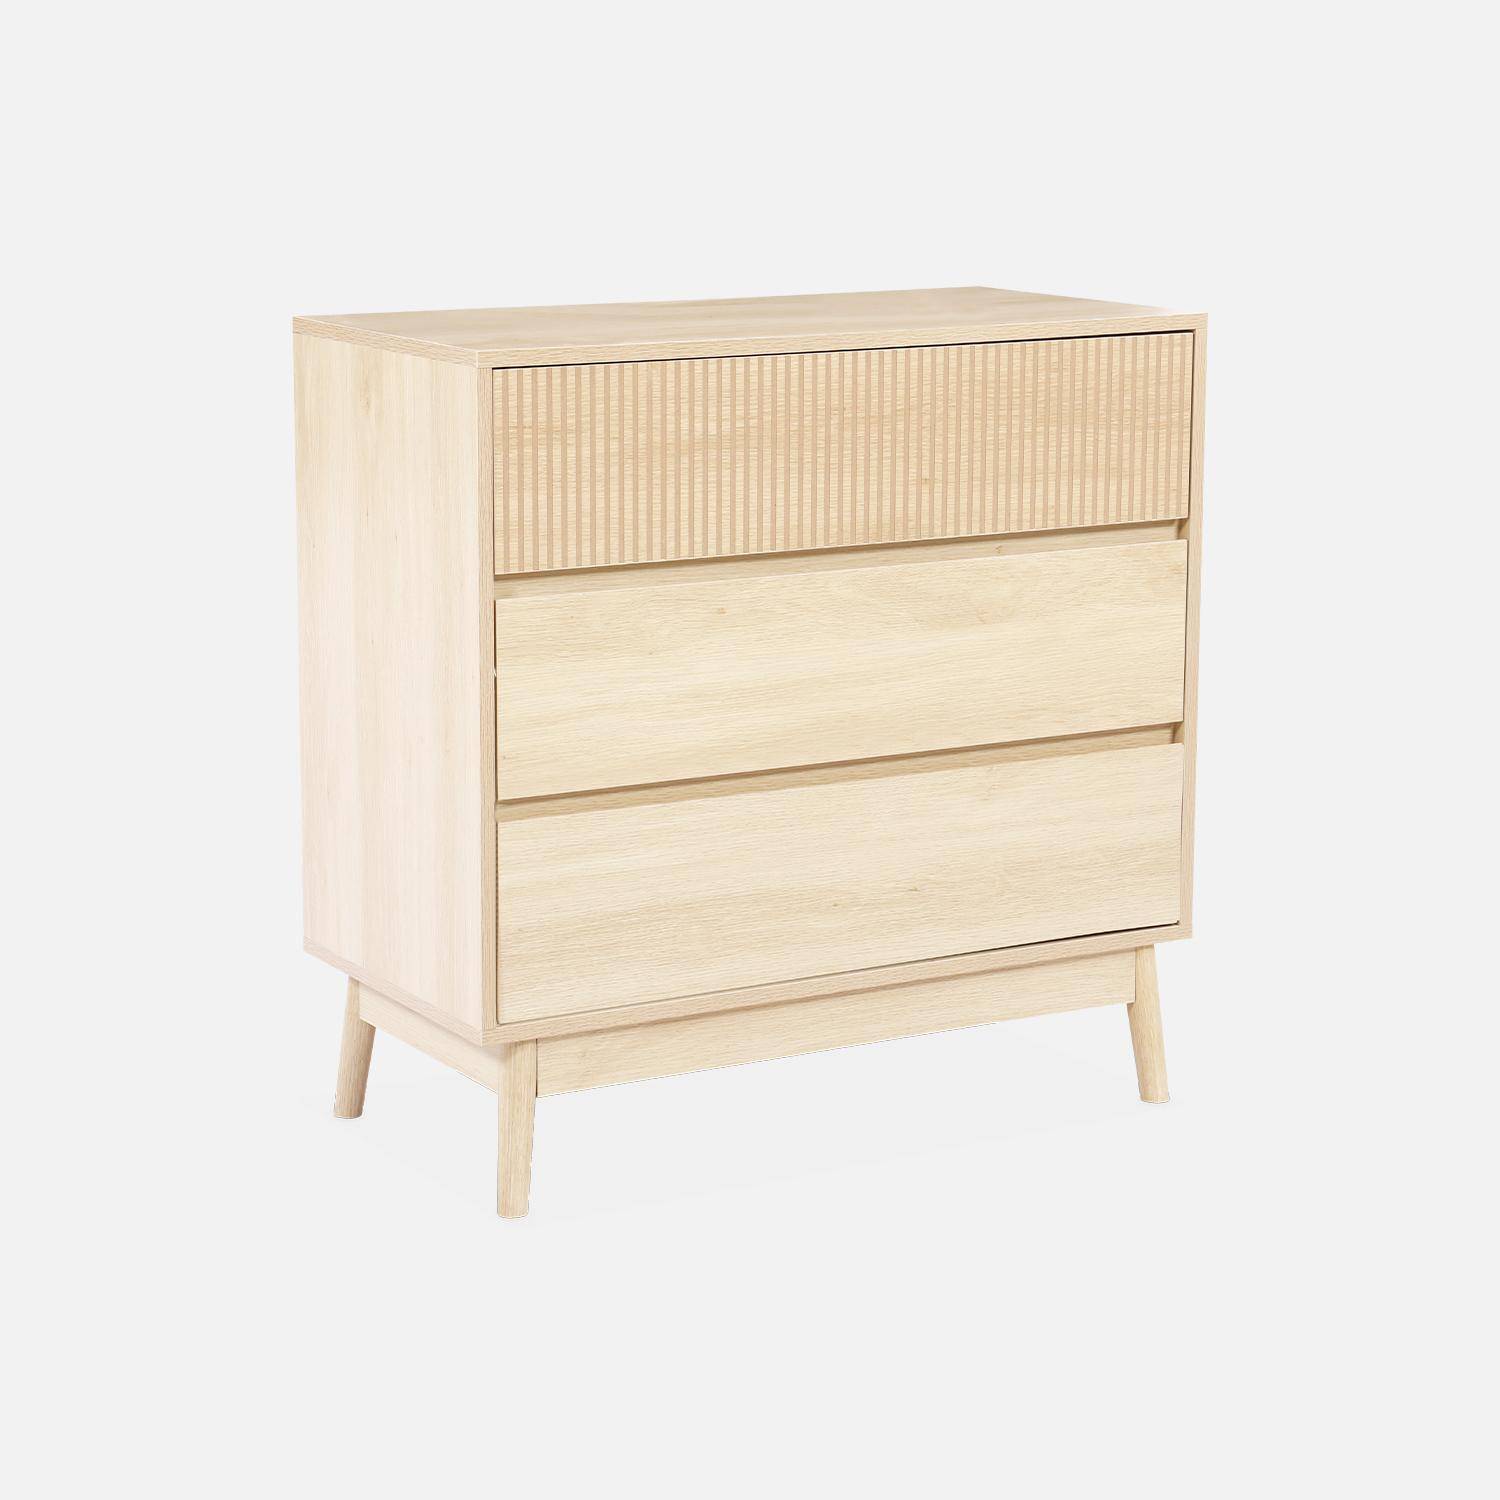 Grooved wood detail 3-drawer chest, 80x40x80cm - Linear - Natural Wood colour Photo3